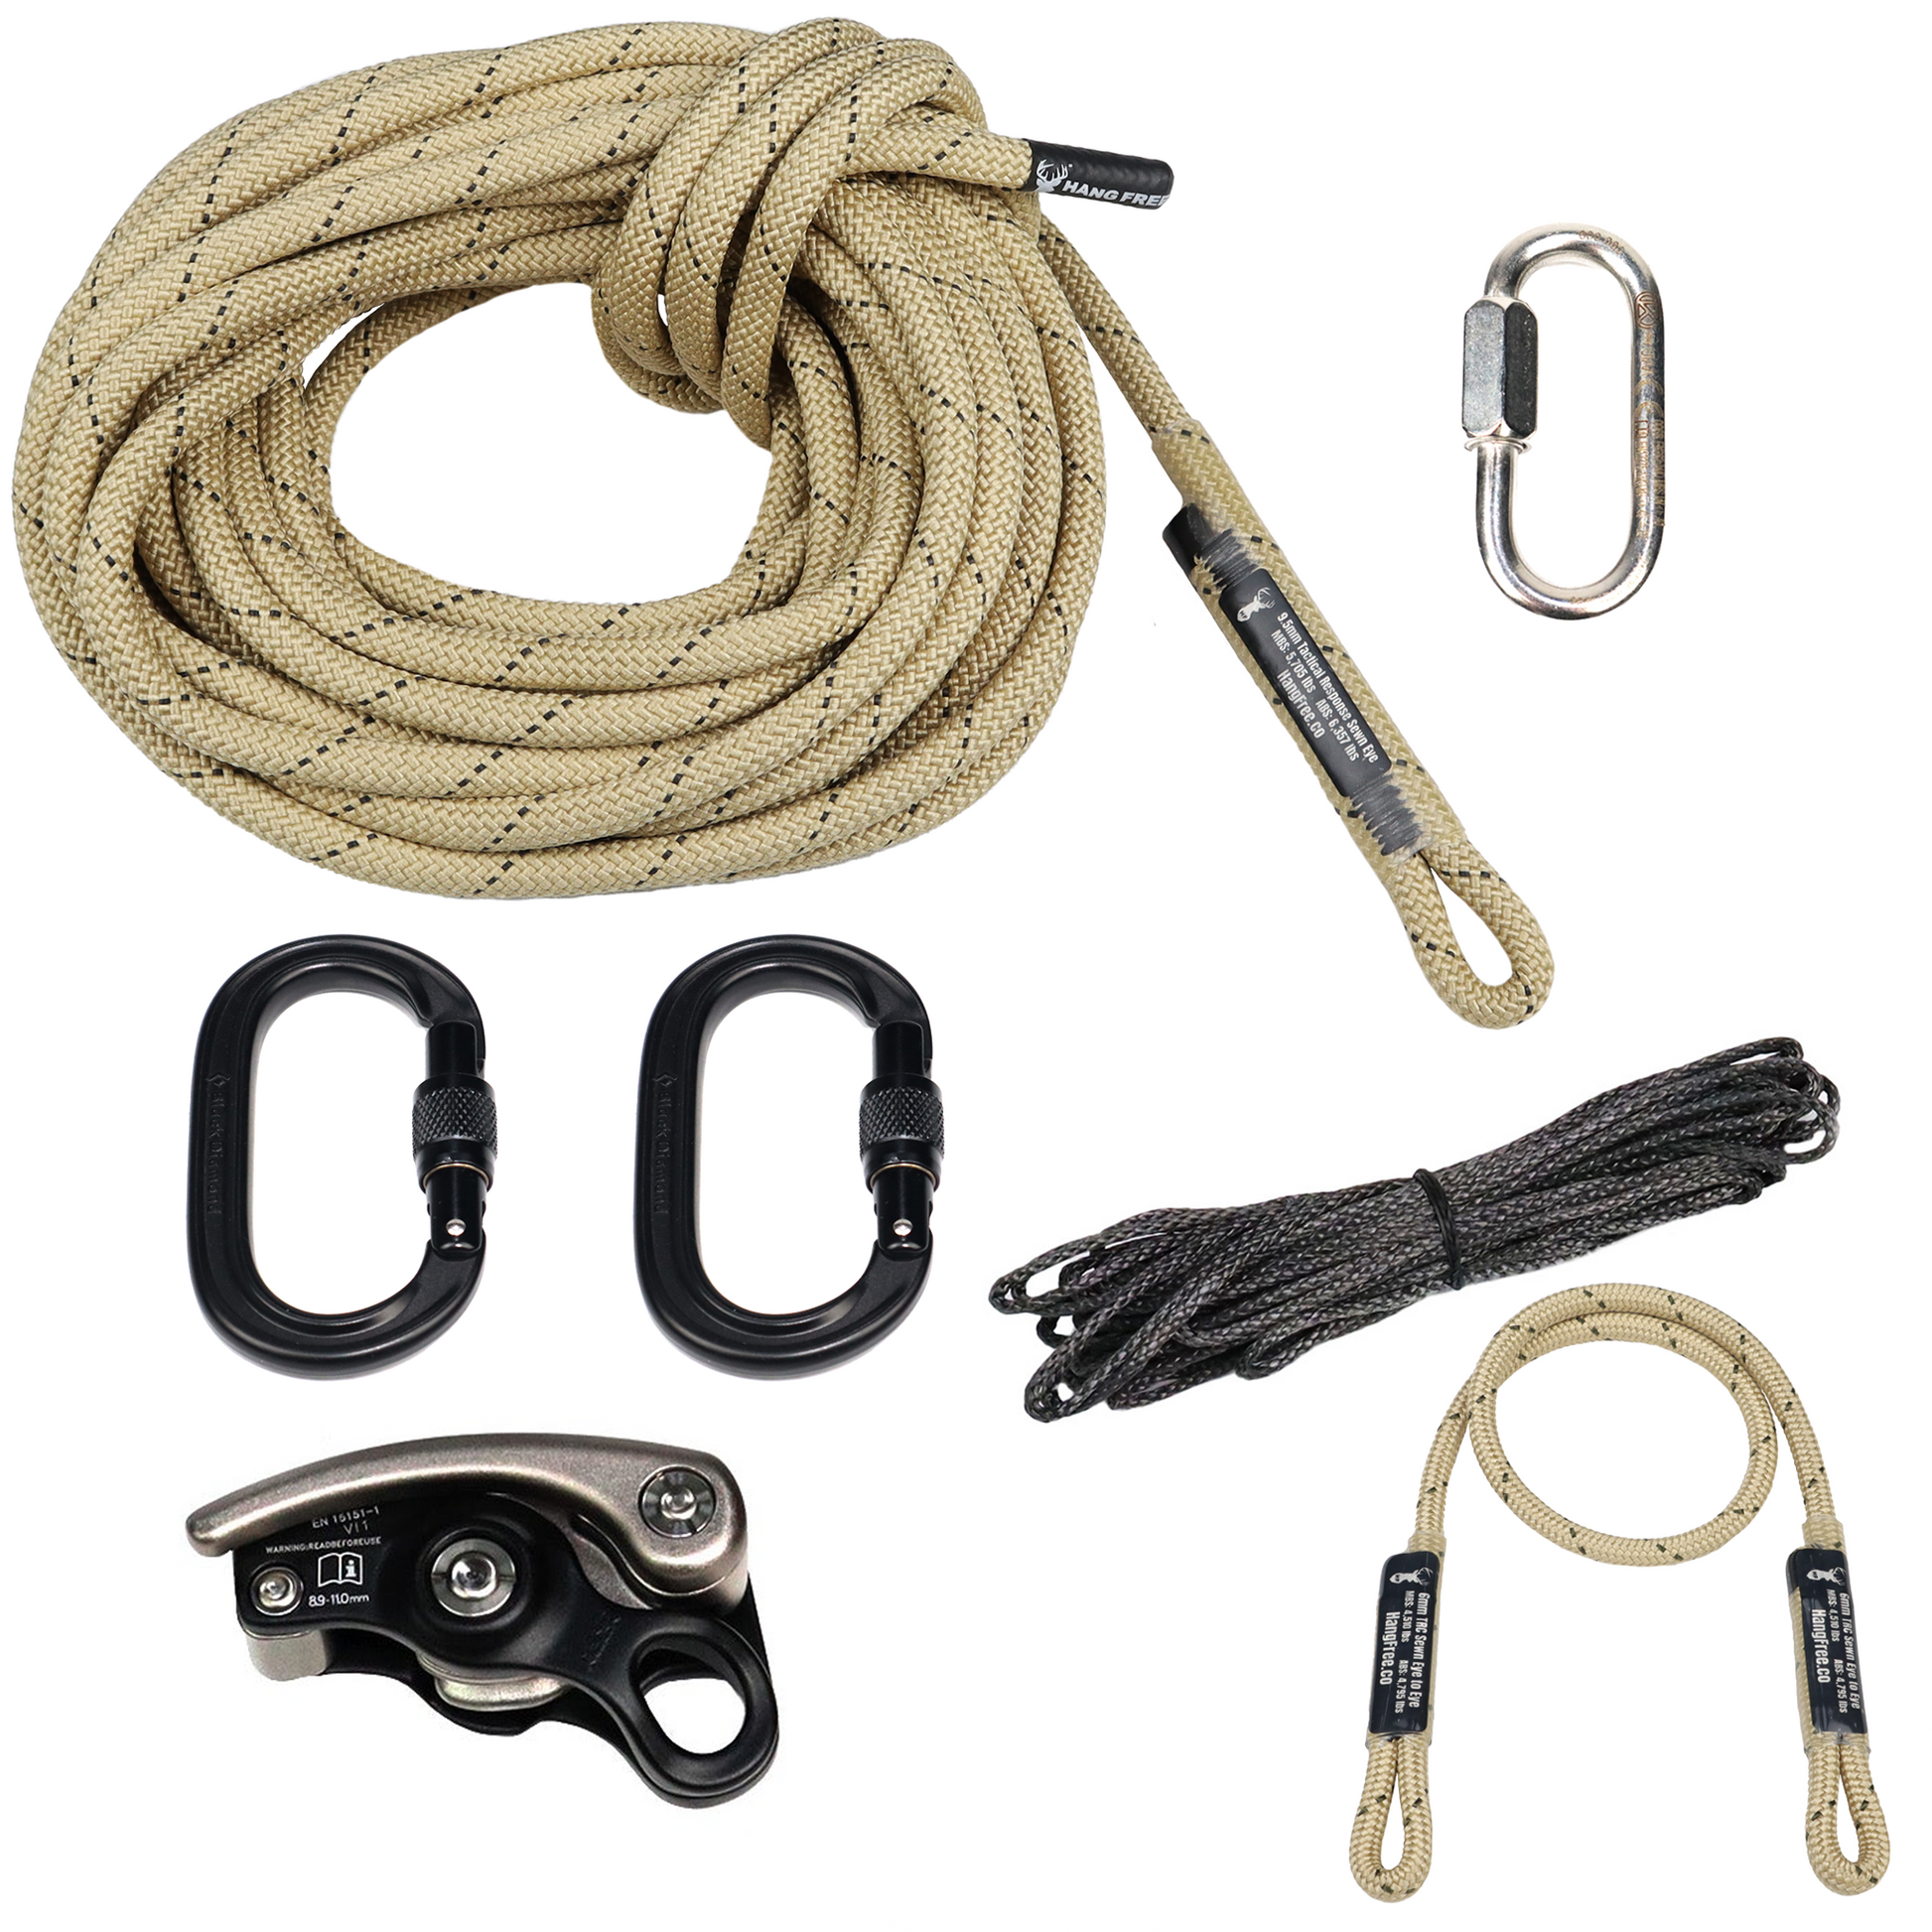 9.5mm Tactical Response Deluxe One Stick/Rappel Kit